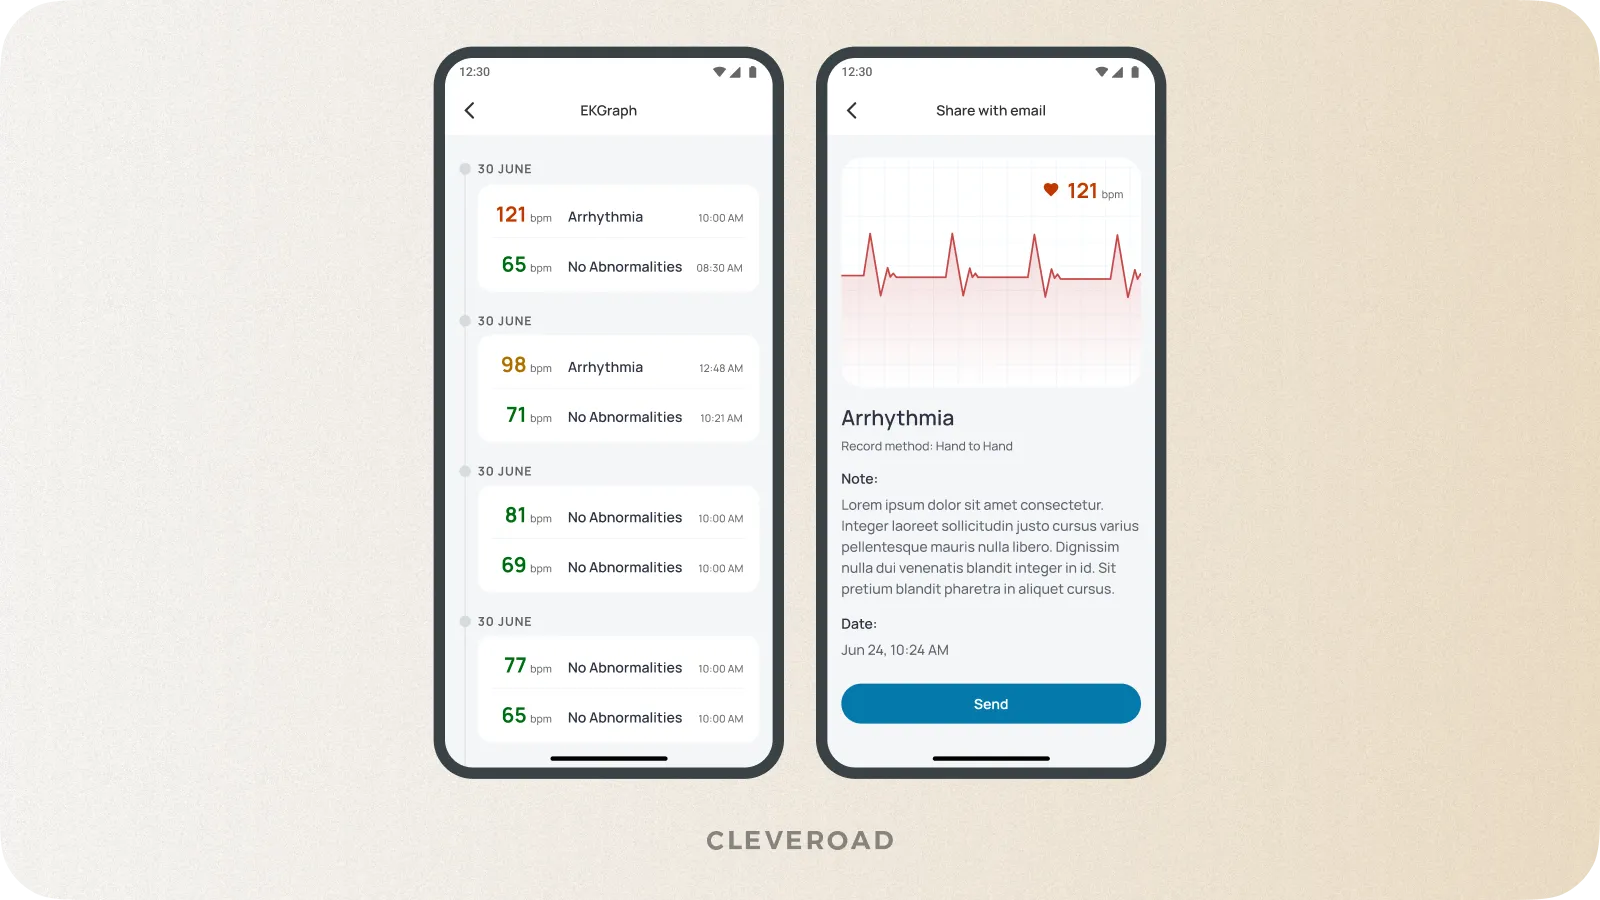 IoT system for measuring ECG developed by Cleveroad